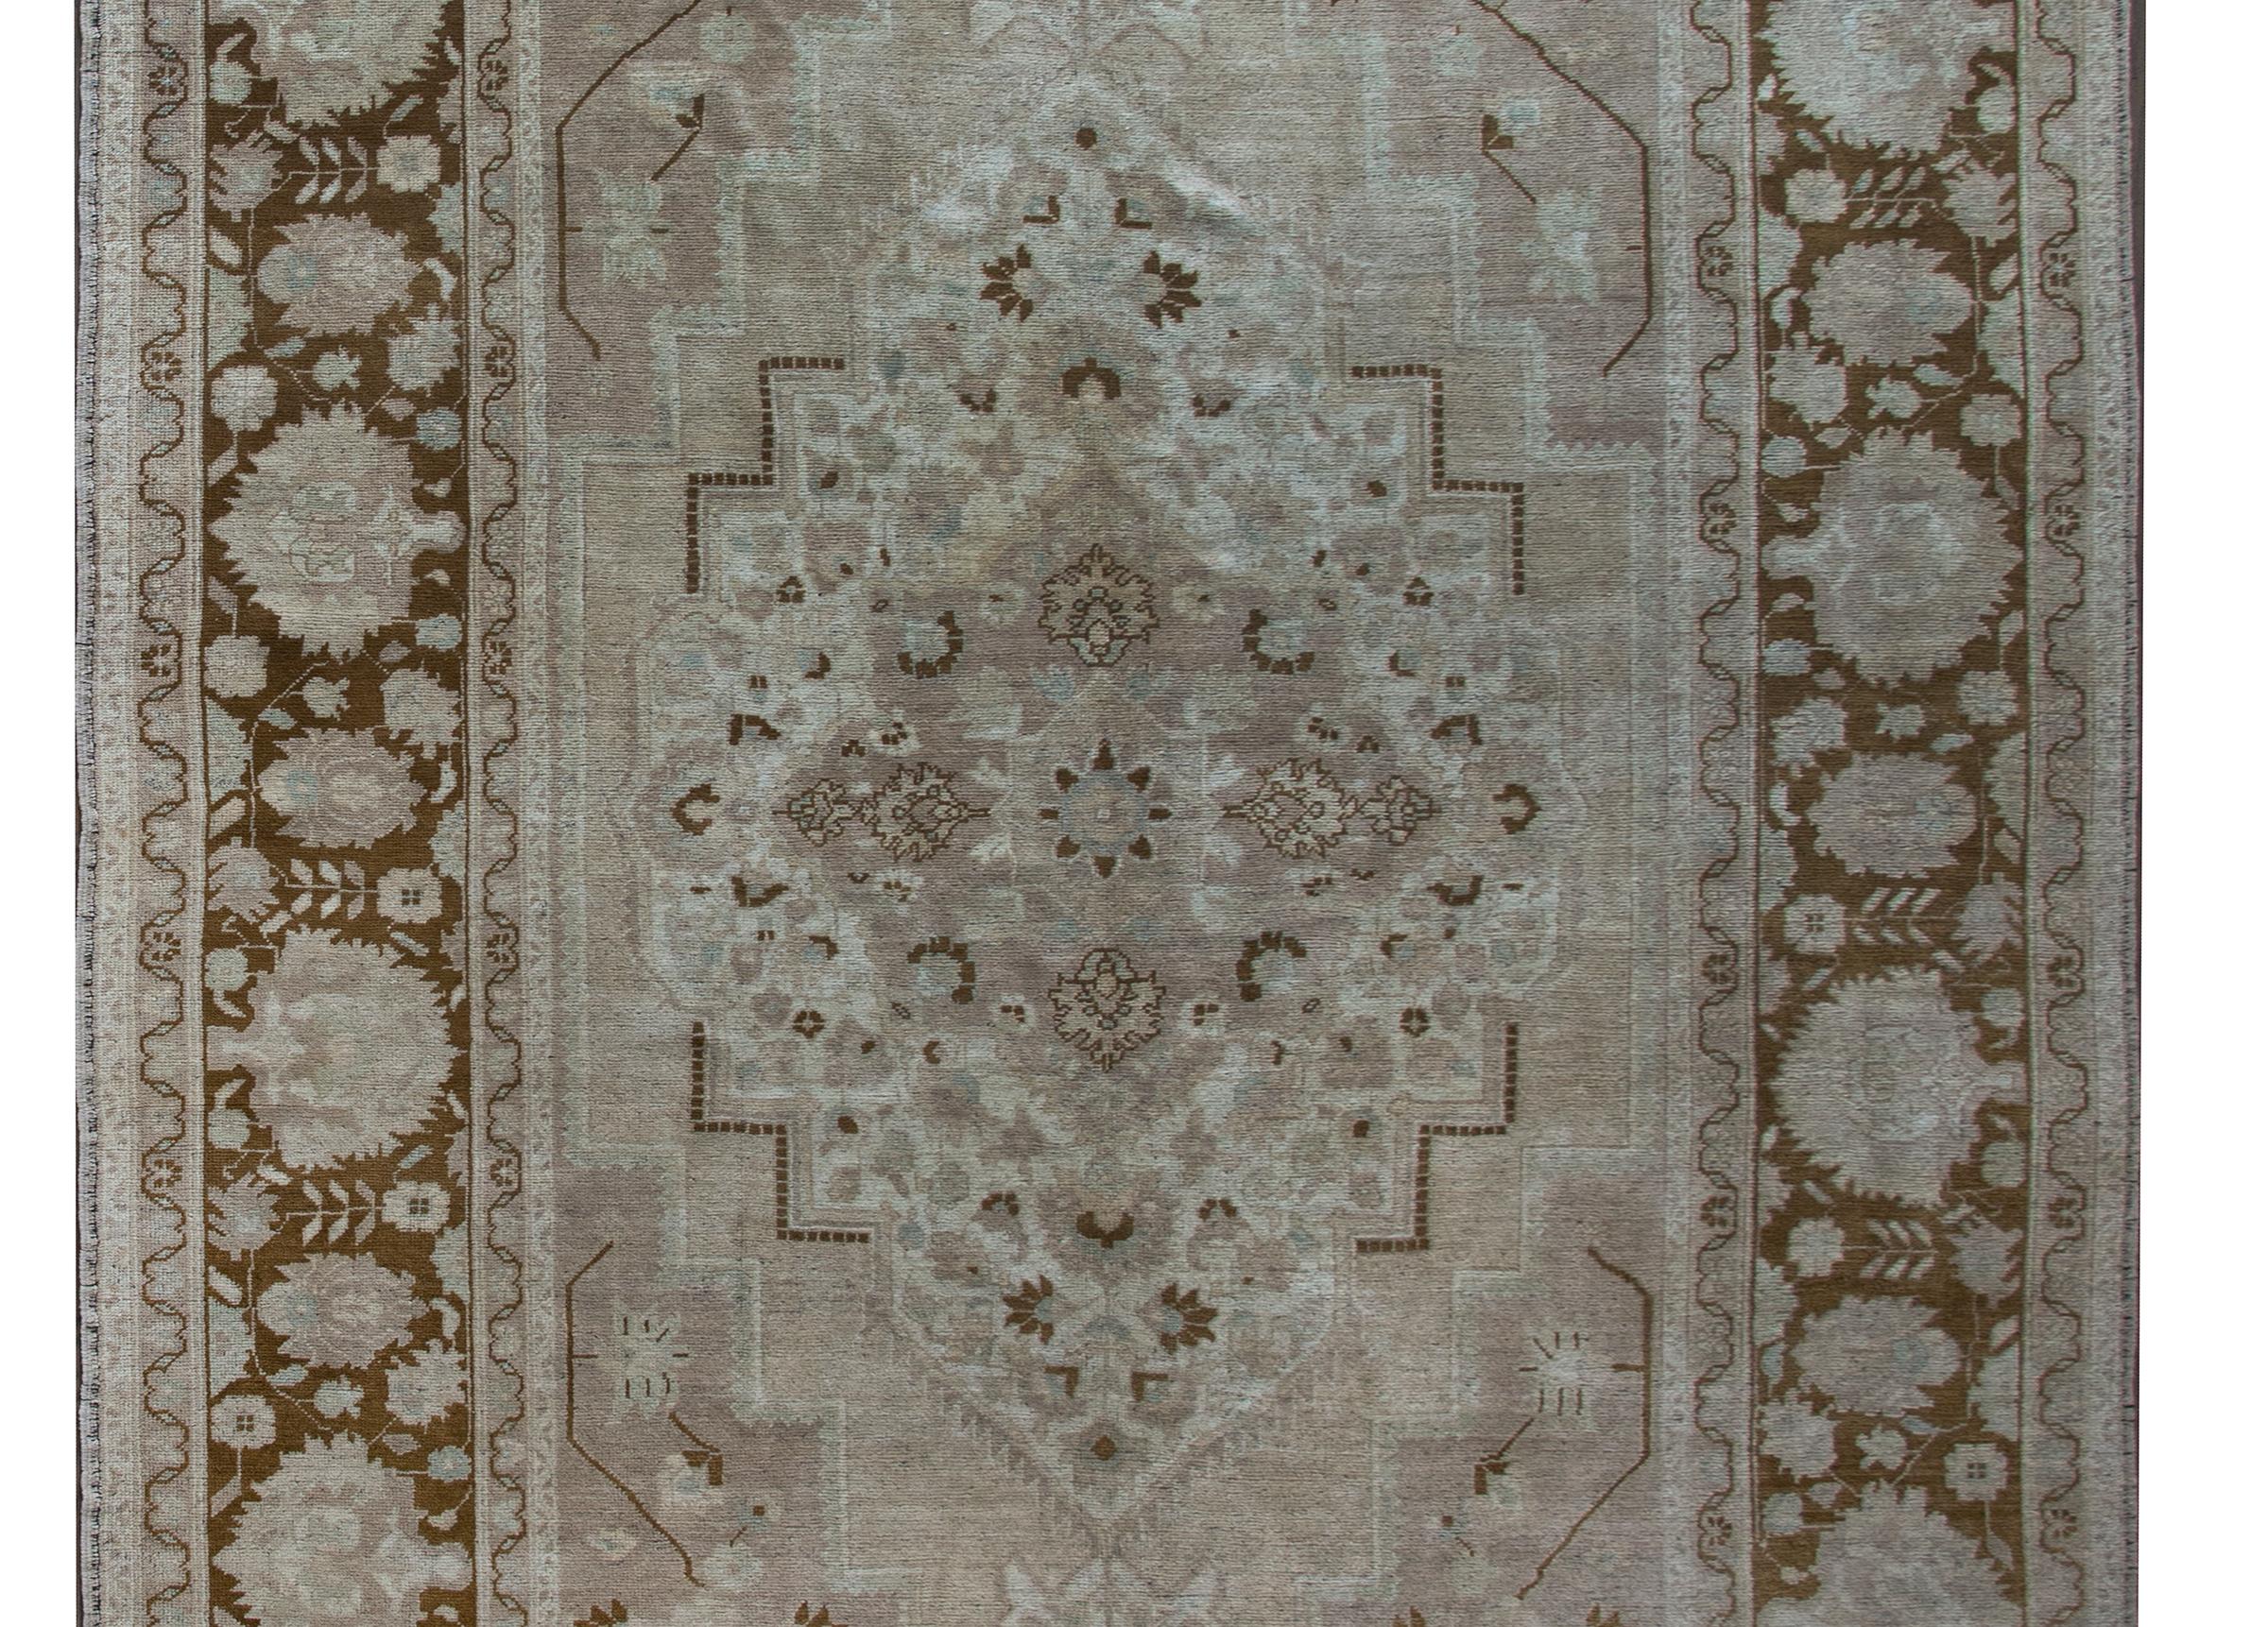 A wonderful early 20th century Turkish oushak rug with a beautiful floral medallion living amidst a field of more flowers and surrounded by a wide large-scale floral and scrolling vine pattern. This rug has been given an antique wash to mute the